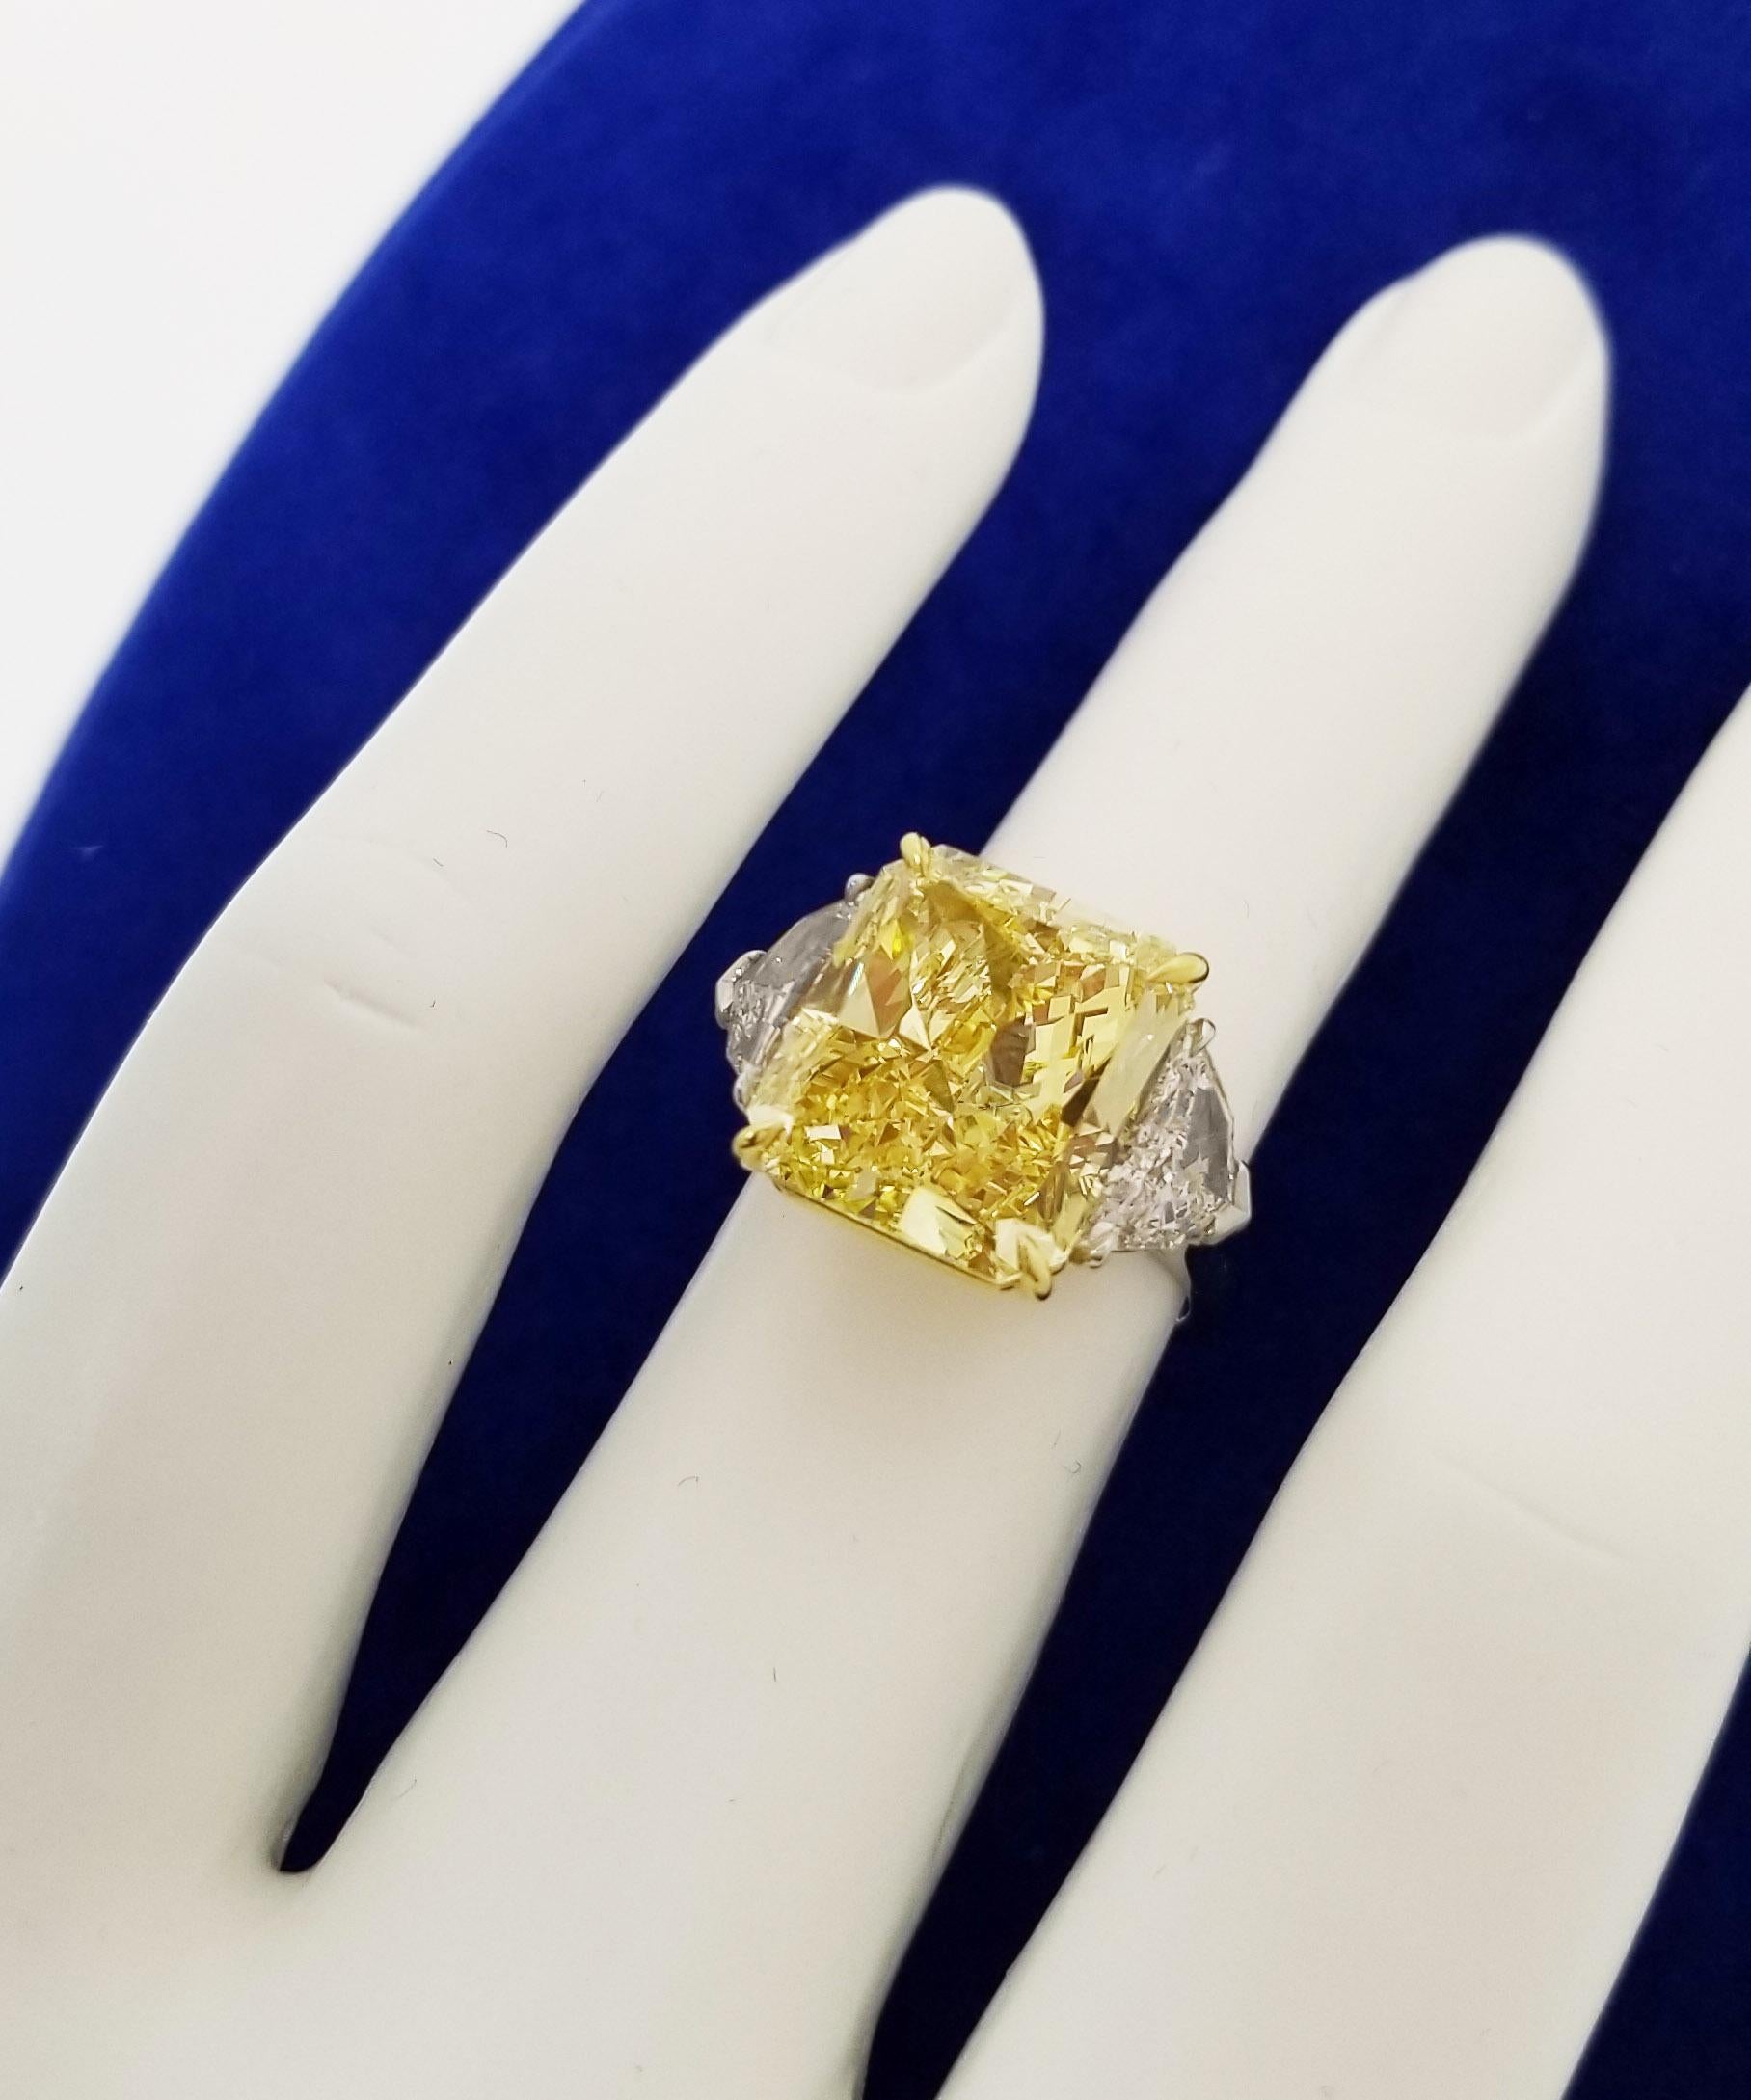 Contemporary Scarselli 10 Carat Fancy Vivid Yellow GIA Diamond in a Platinum Engagement Ring